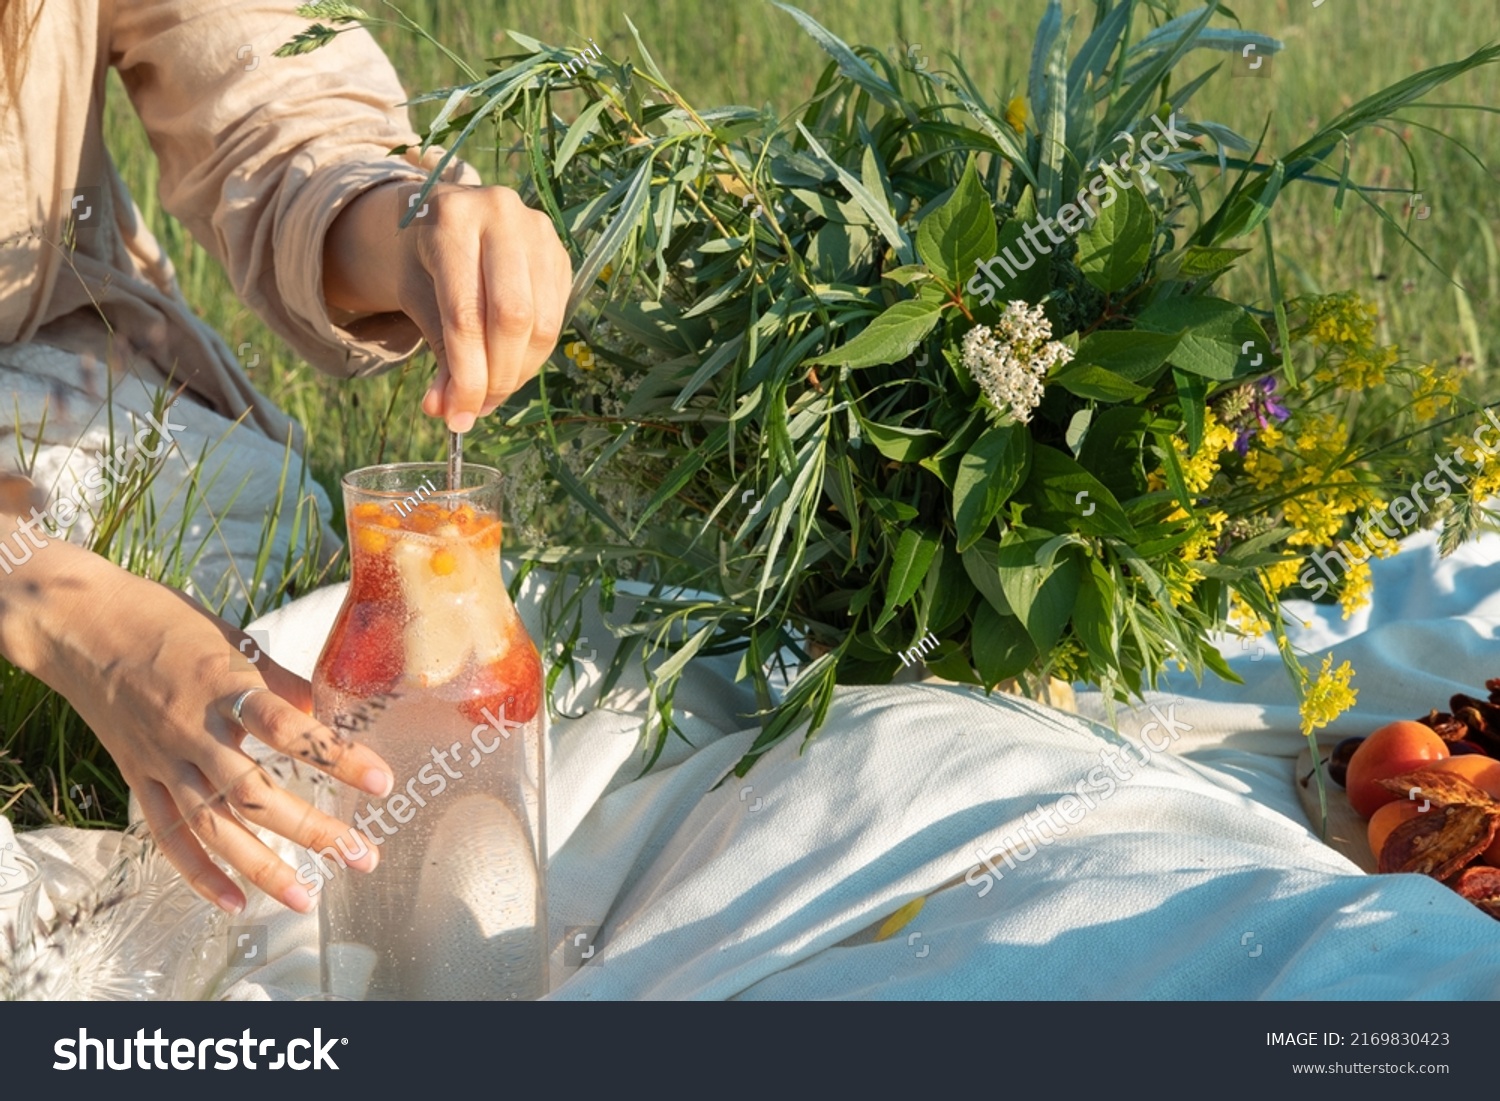 Unrecognized woman making a refreshing drink from strawberries at a picnic. #2169830423